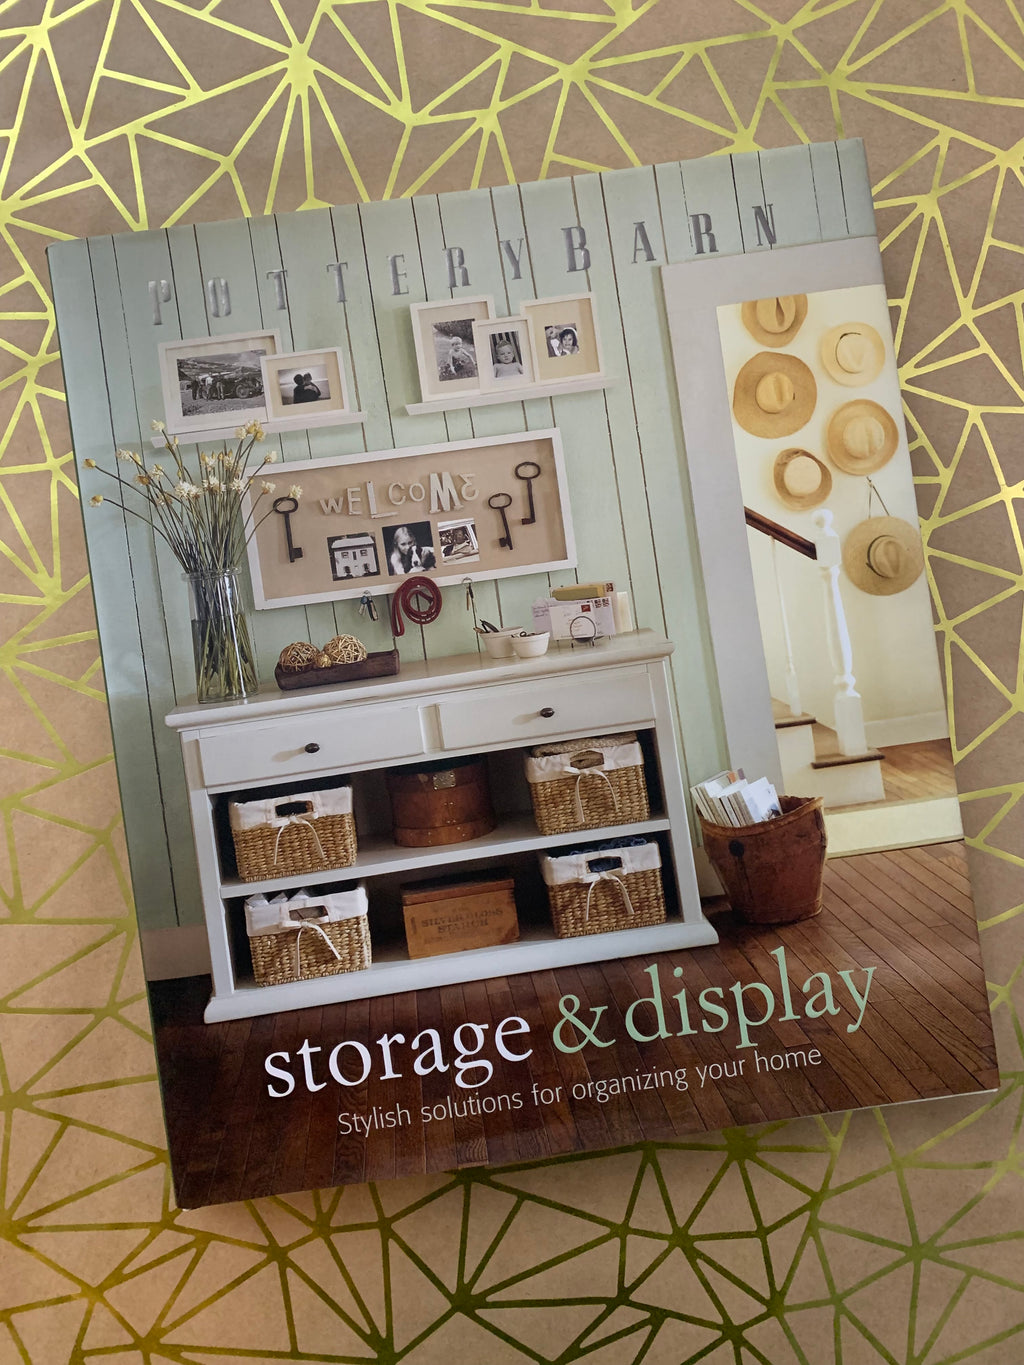 Pottery Barn: Storage & Display- Stylish Solutions for Organizing Your Home